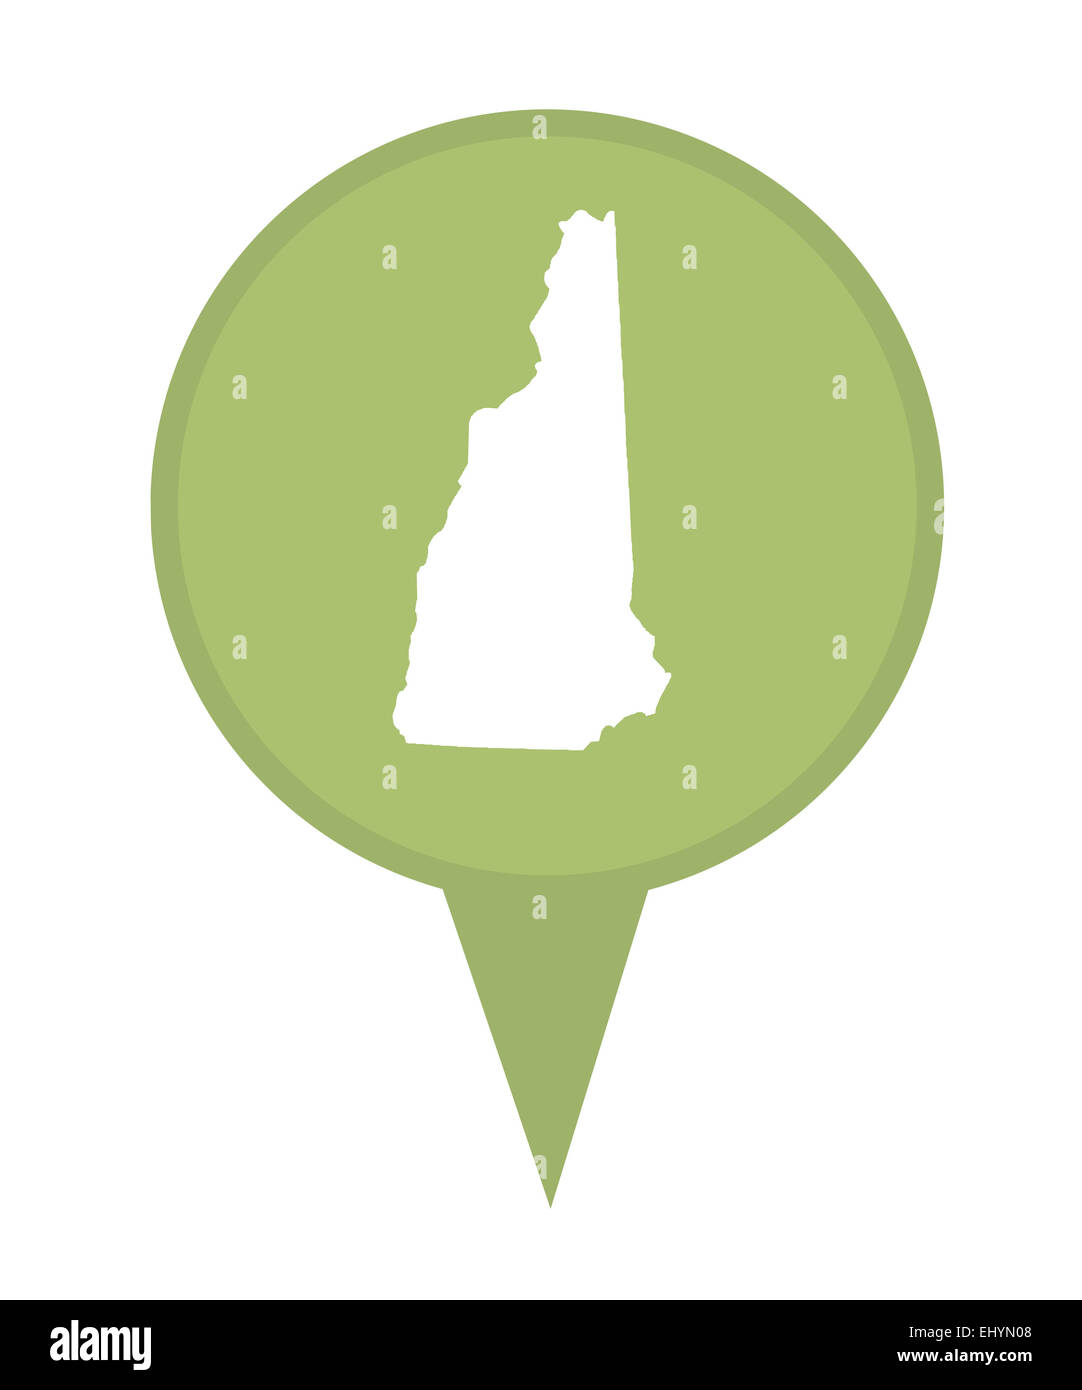 American state of New Hampshire marker pin isolated on a white background. Stock Photo